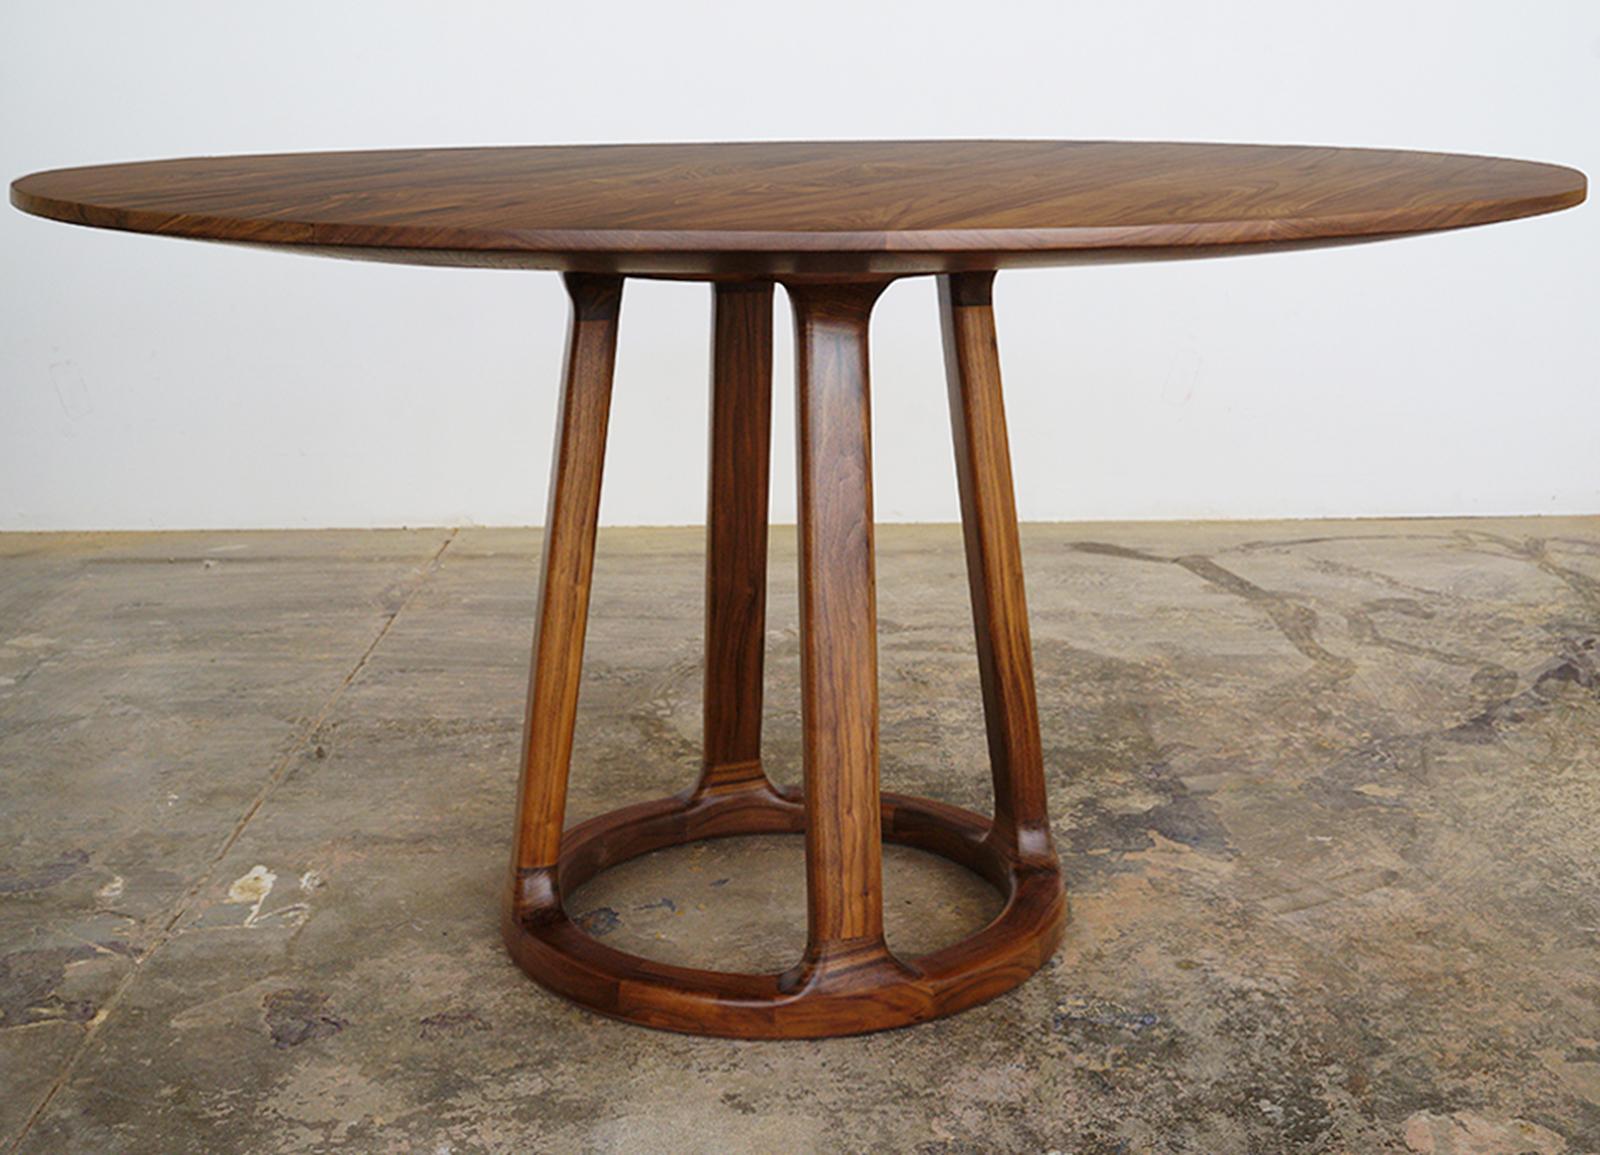 Contemporary Orenn Table in Walnut Wood, Hand-Sculpted Table by Kokora For Sale